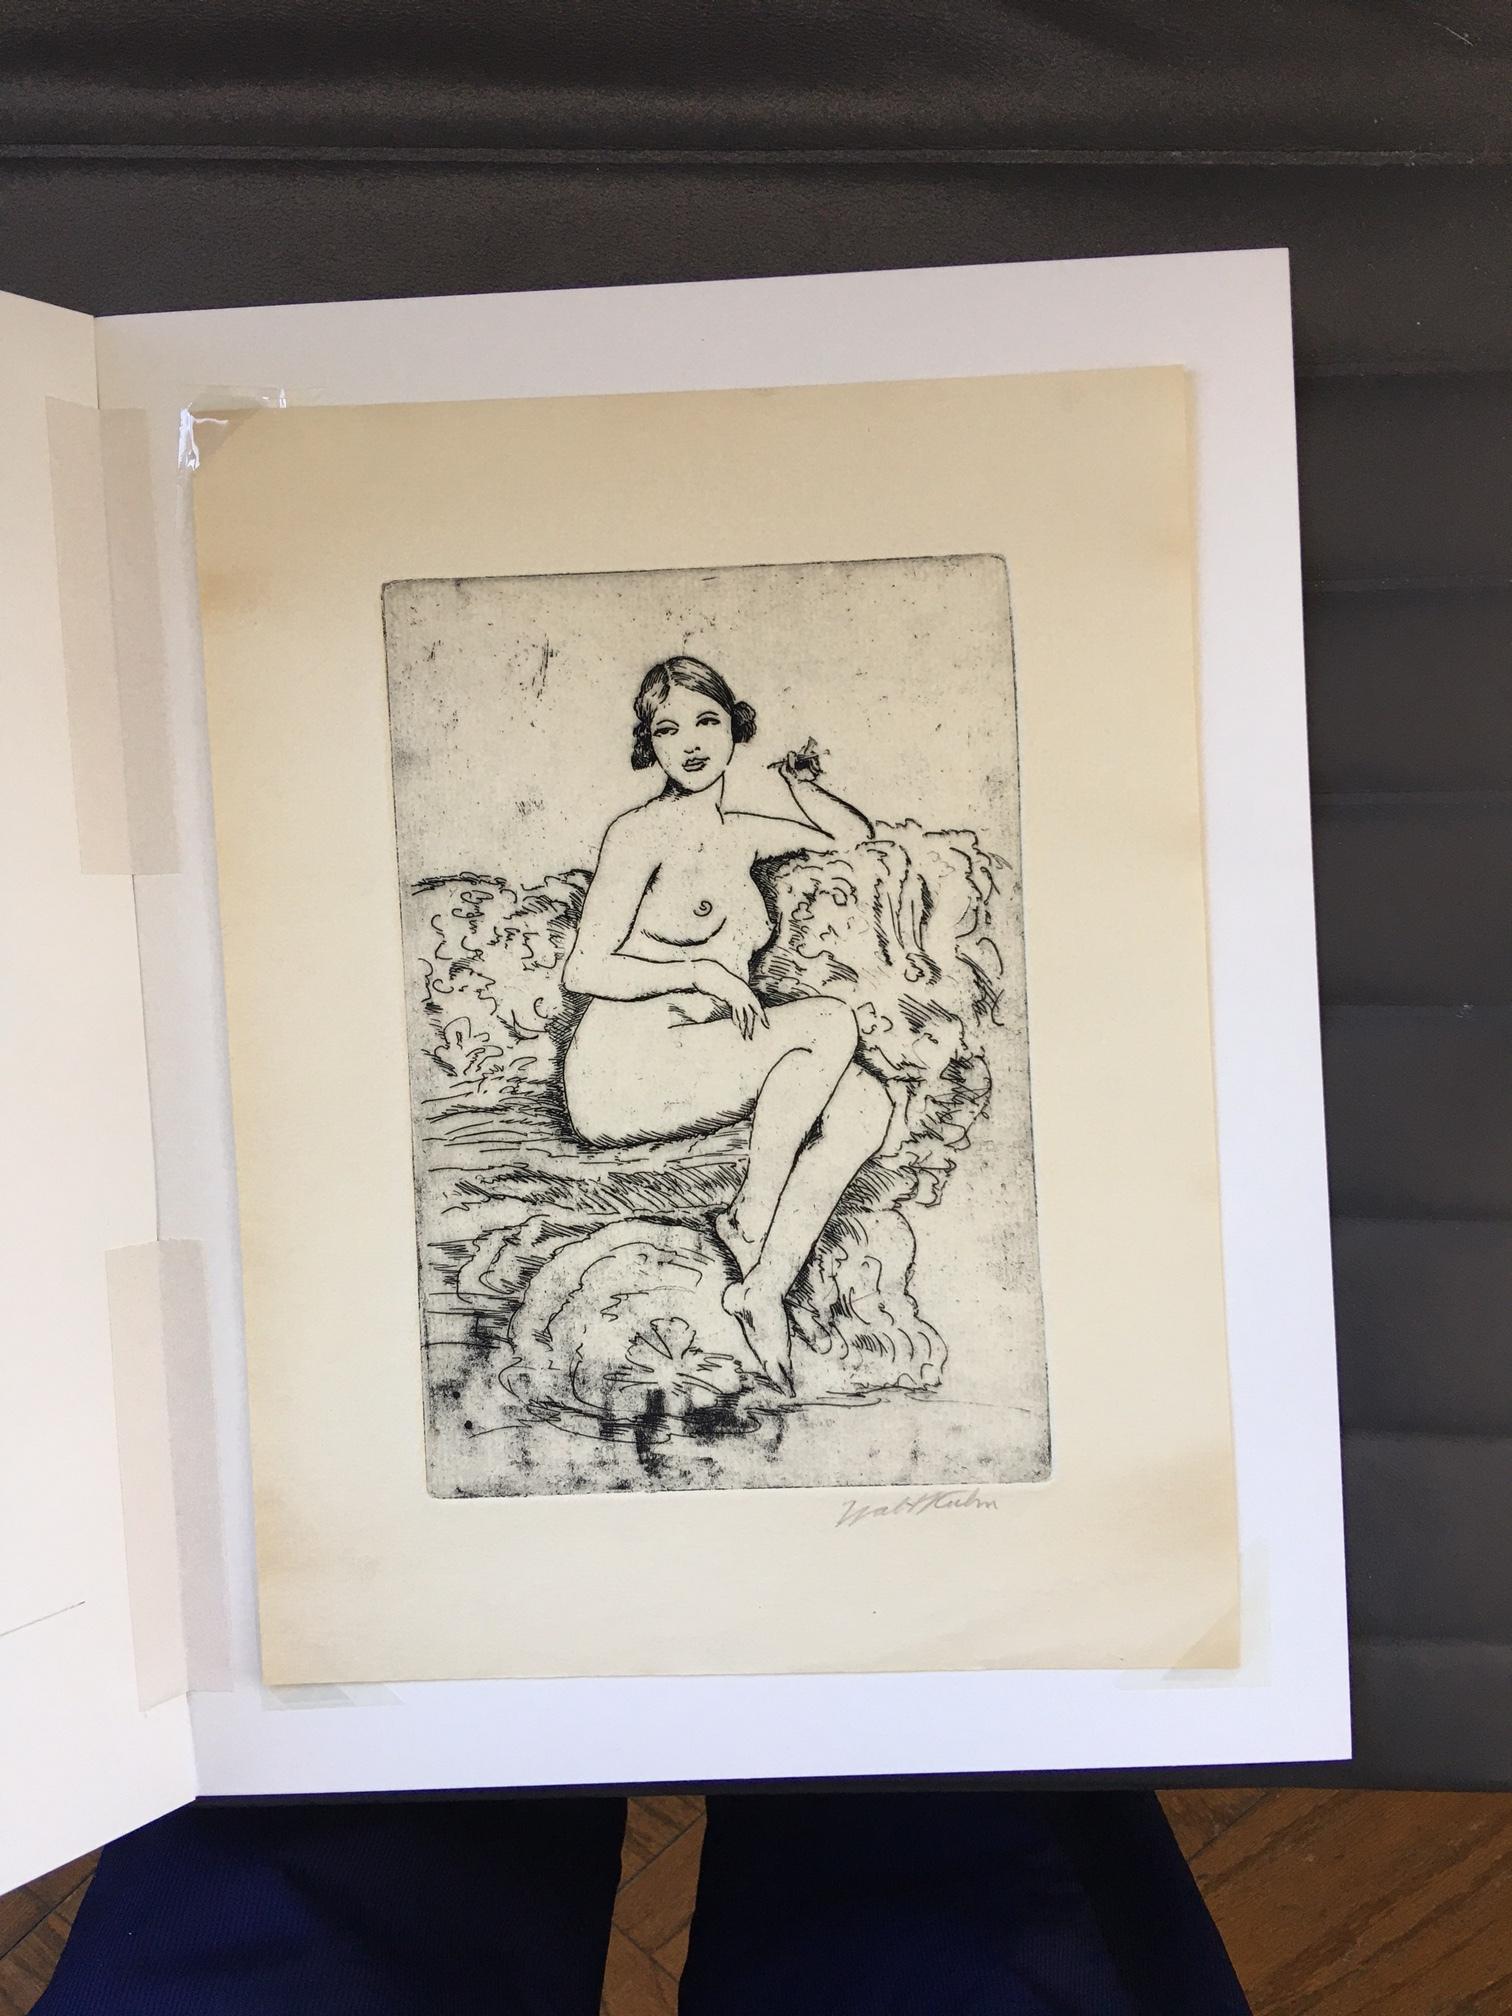 [Nude on Couch, Right Arm on Leg] - Print by Walt Kuhn